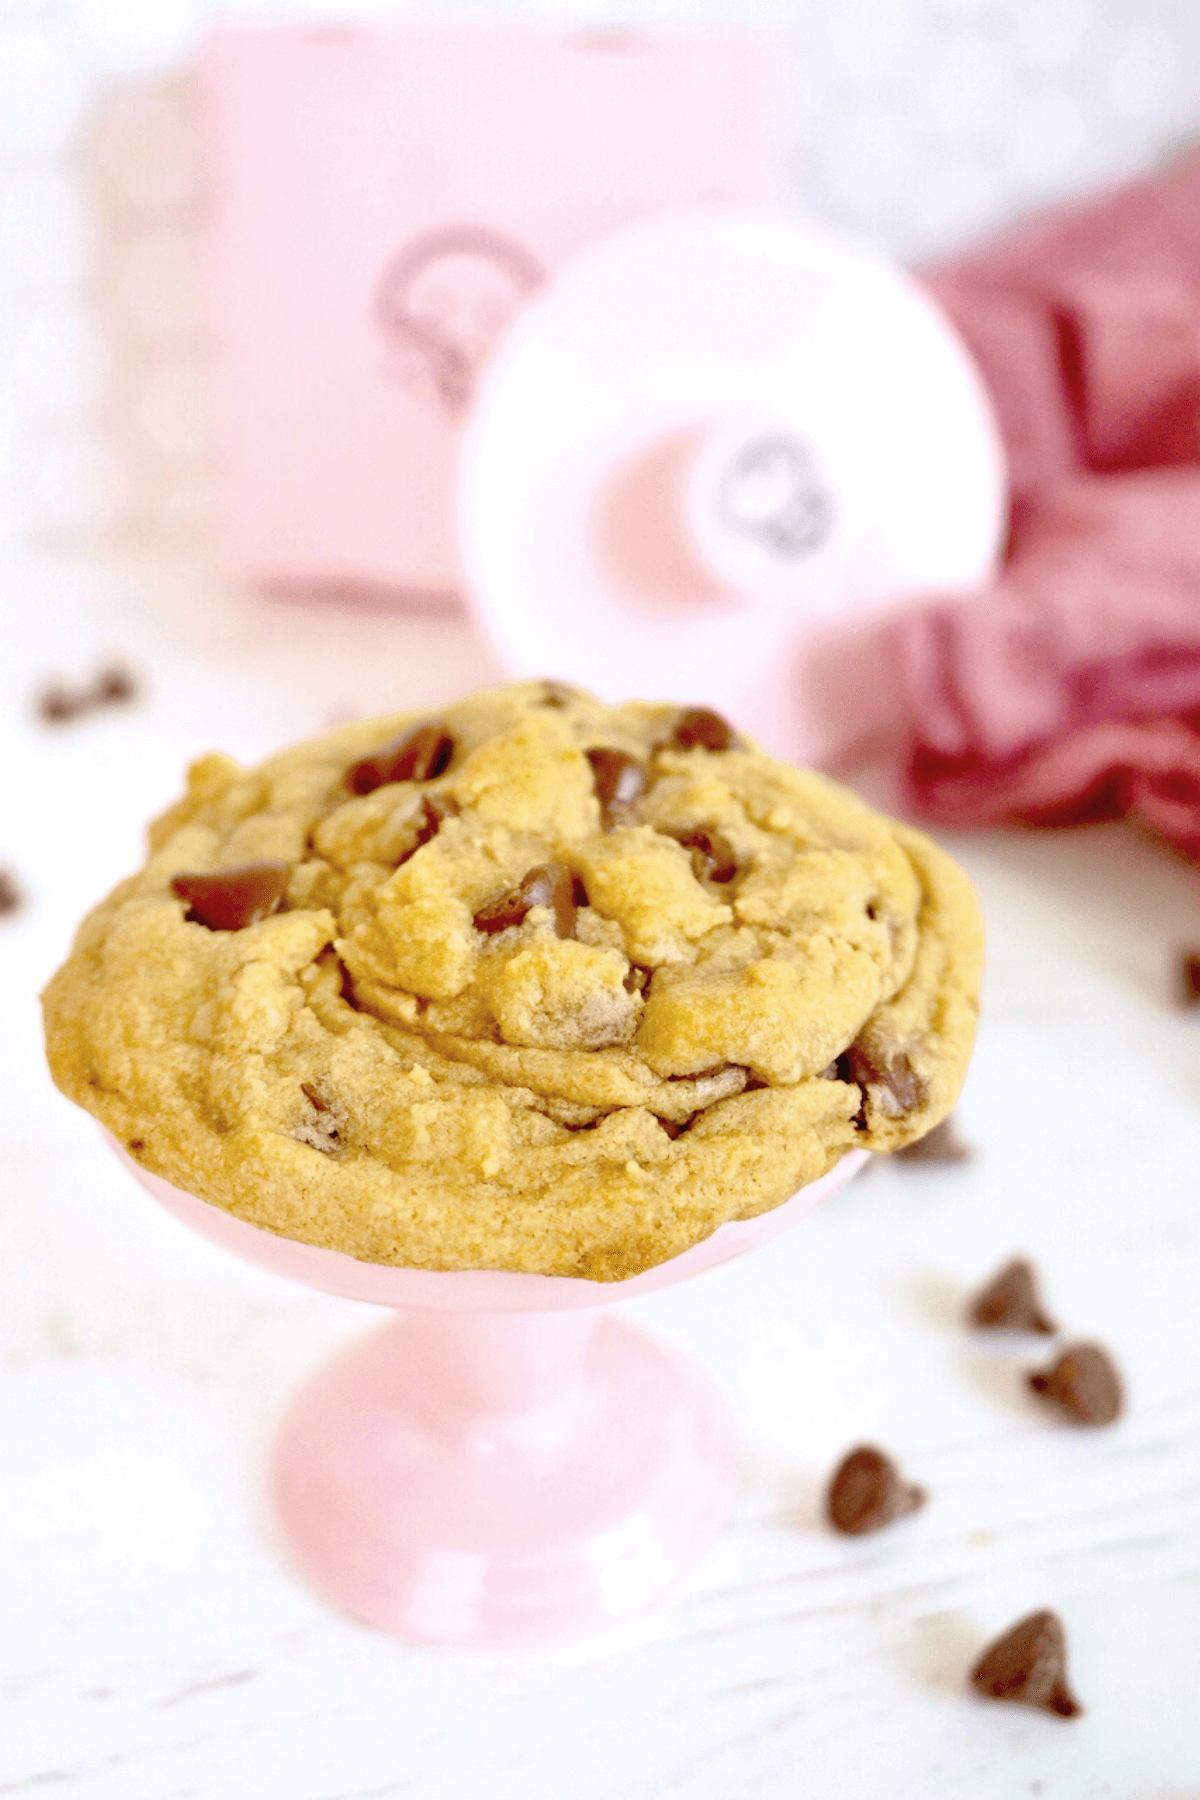 Crumbl Cookie chocolate chip on pink pedestal with crumbl cookie box and cookie cutter behind, scattered milk chocolate chips around cookie.